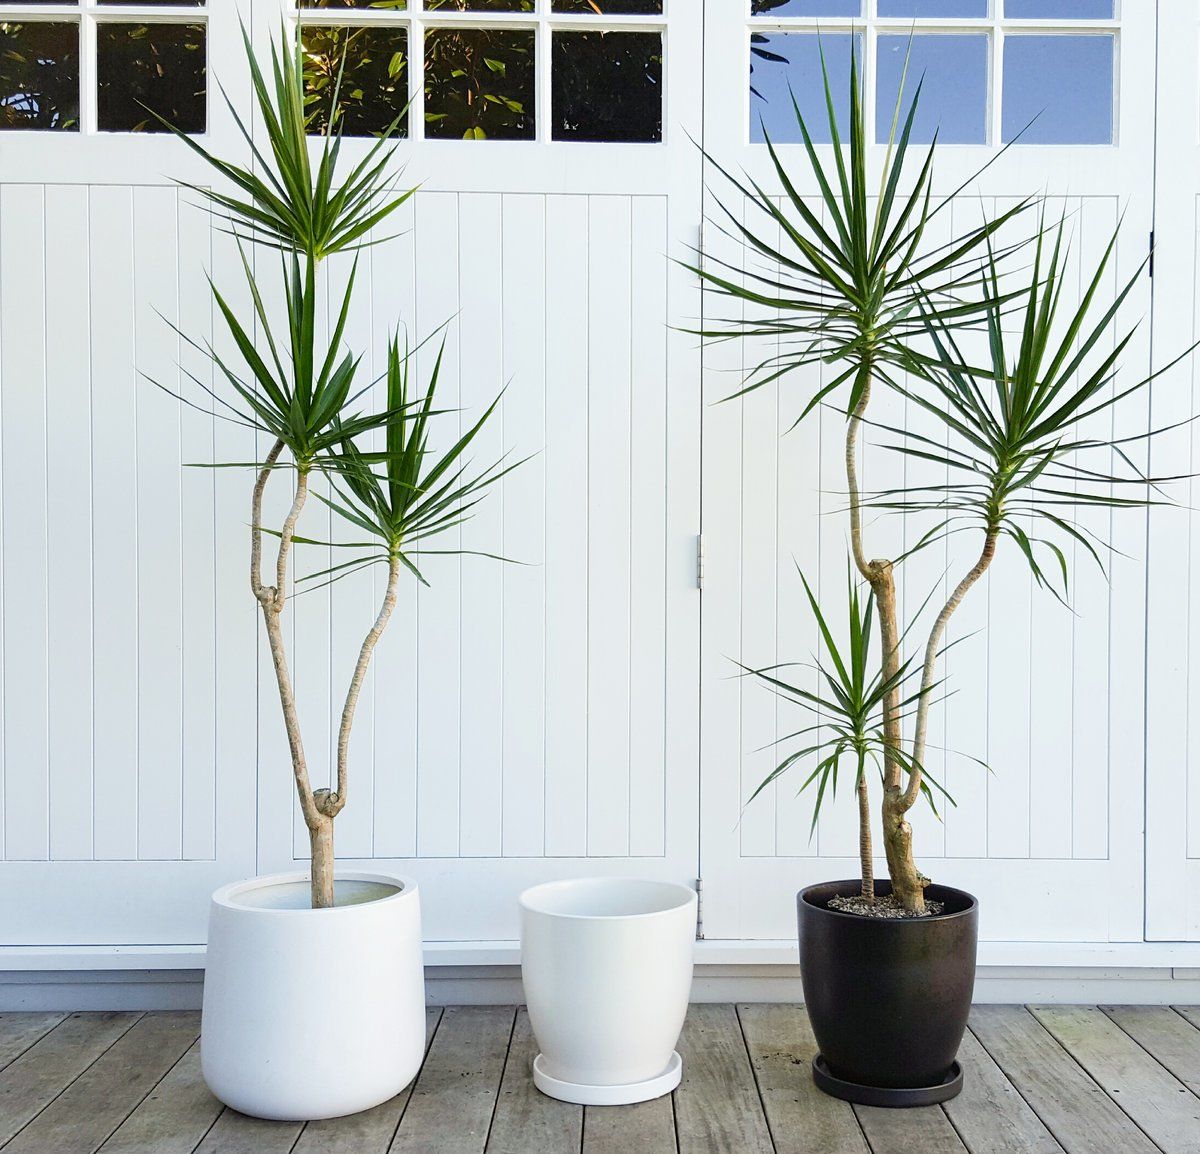 9 types of plants harmful to pets that need to be removed immediately from the house - Photo 8.